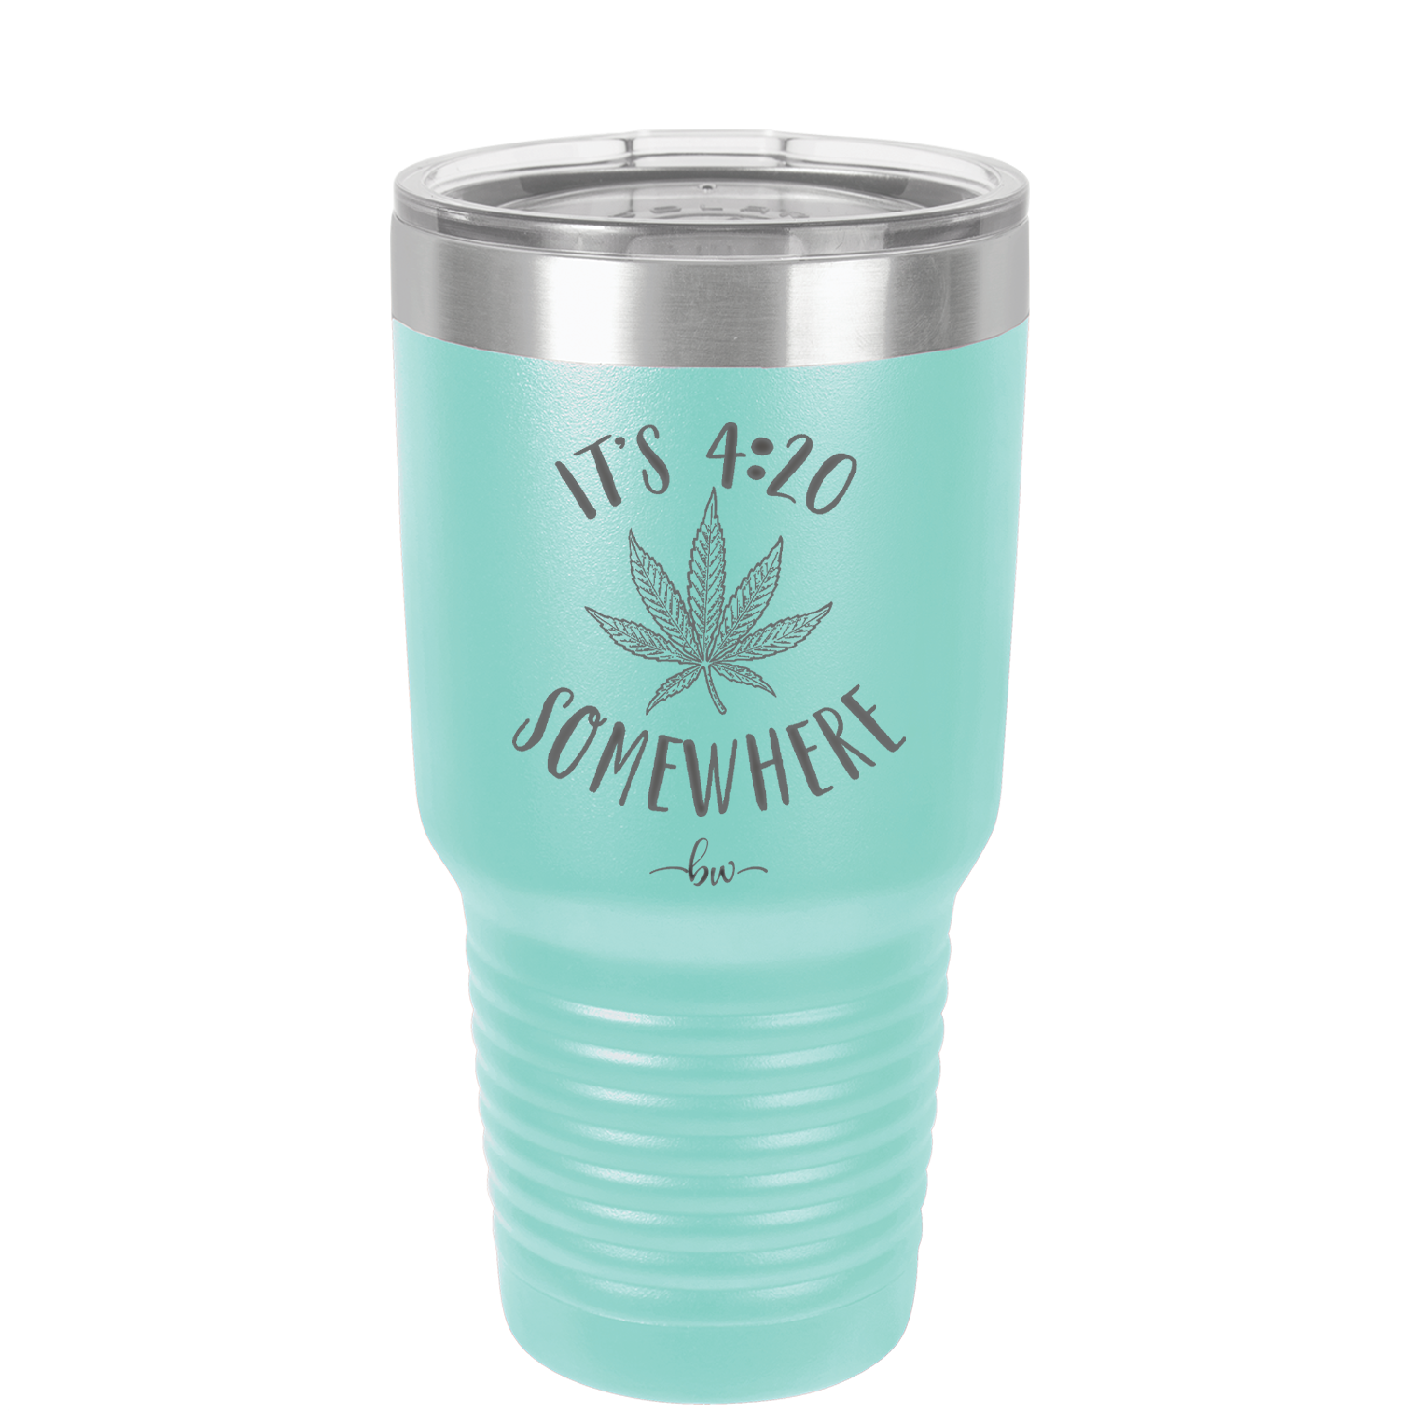 It's 420 Somewhere - Laser Engraved Stainless Steel Drinkware - 1283 -